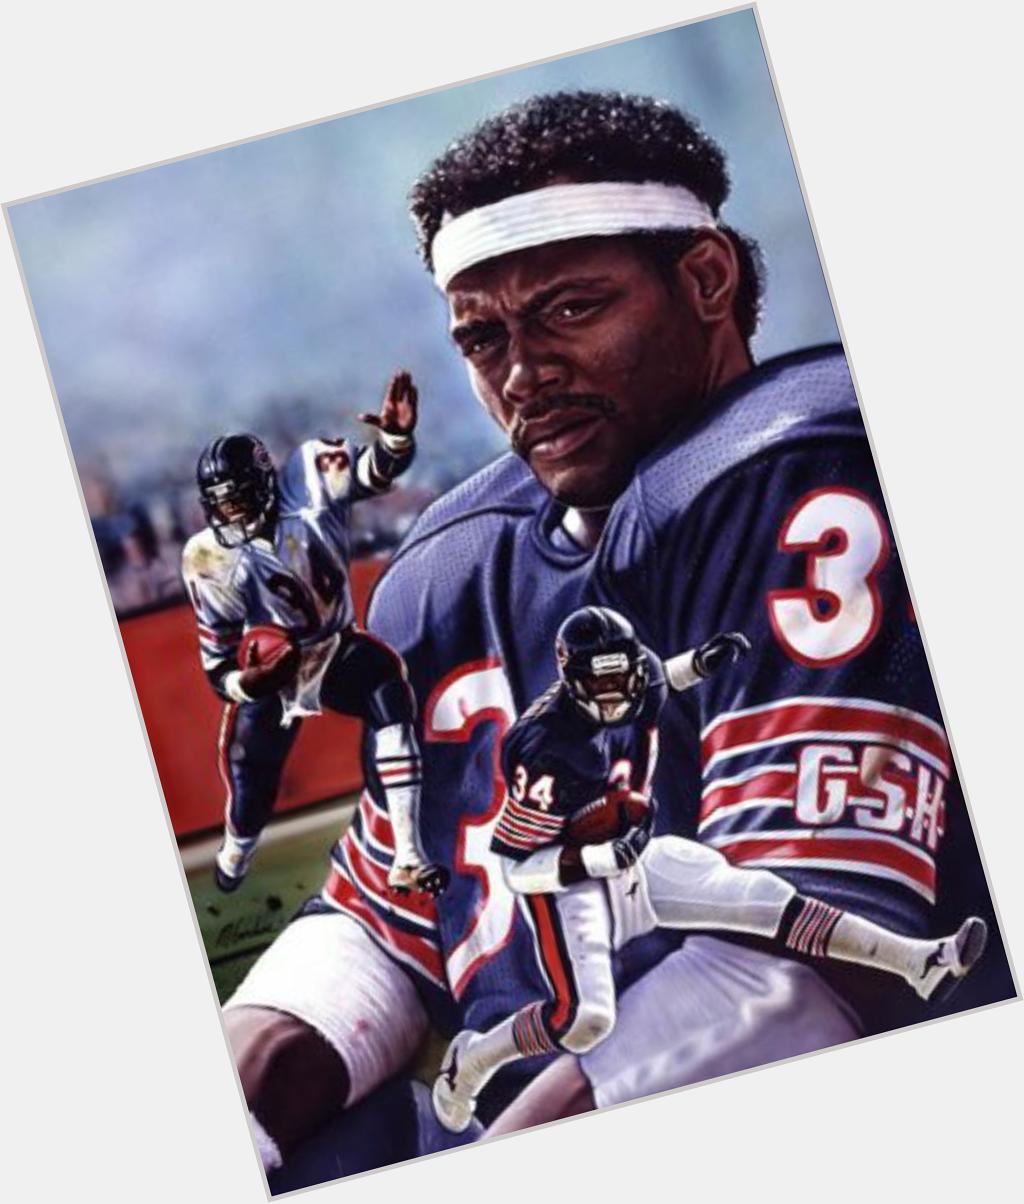 Happy Birthday to the G.O.A.T, Walter Payton! Miss you everyday Sweetness. 